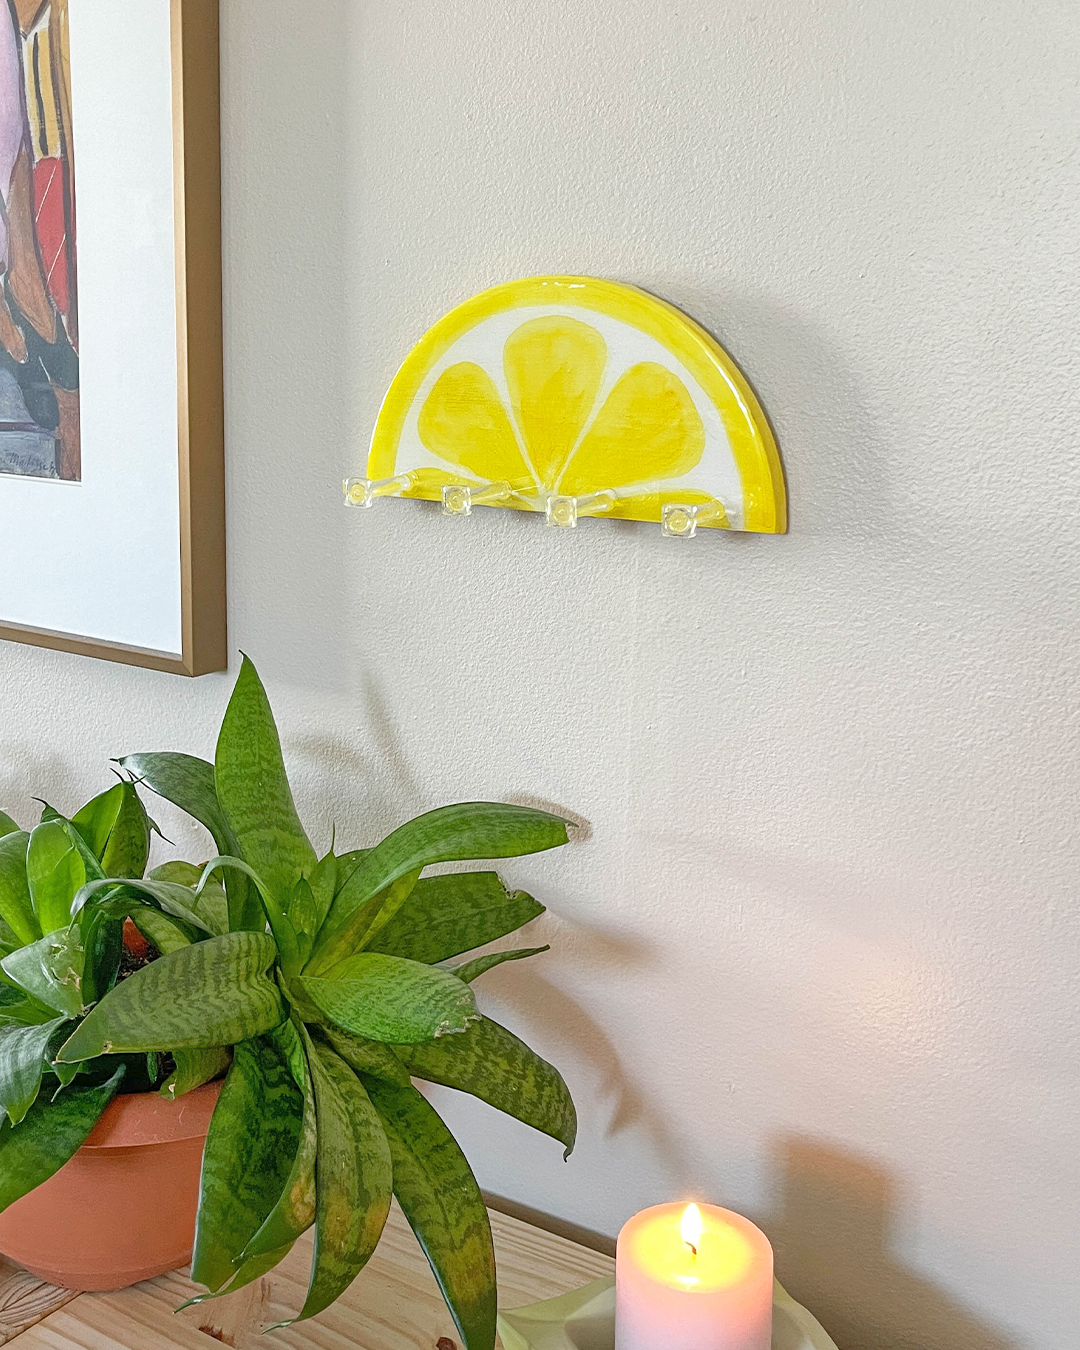 Bright and cheerful lemon slice design key holder, handcrafted for wall-mounted storage in kitchens or entryways